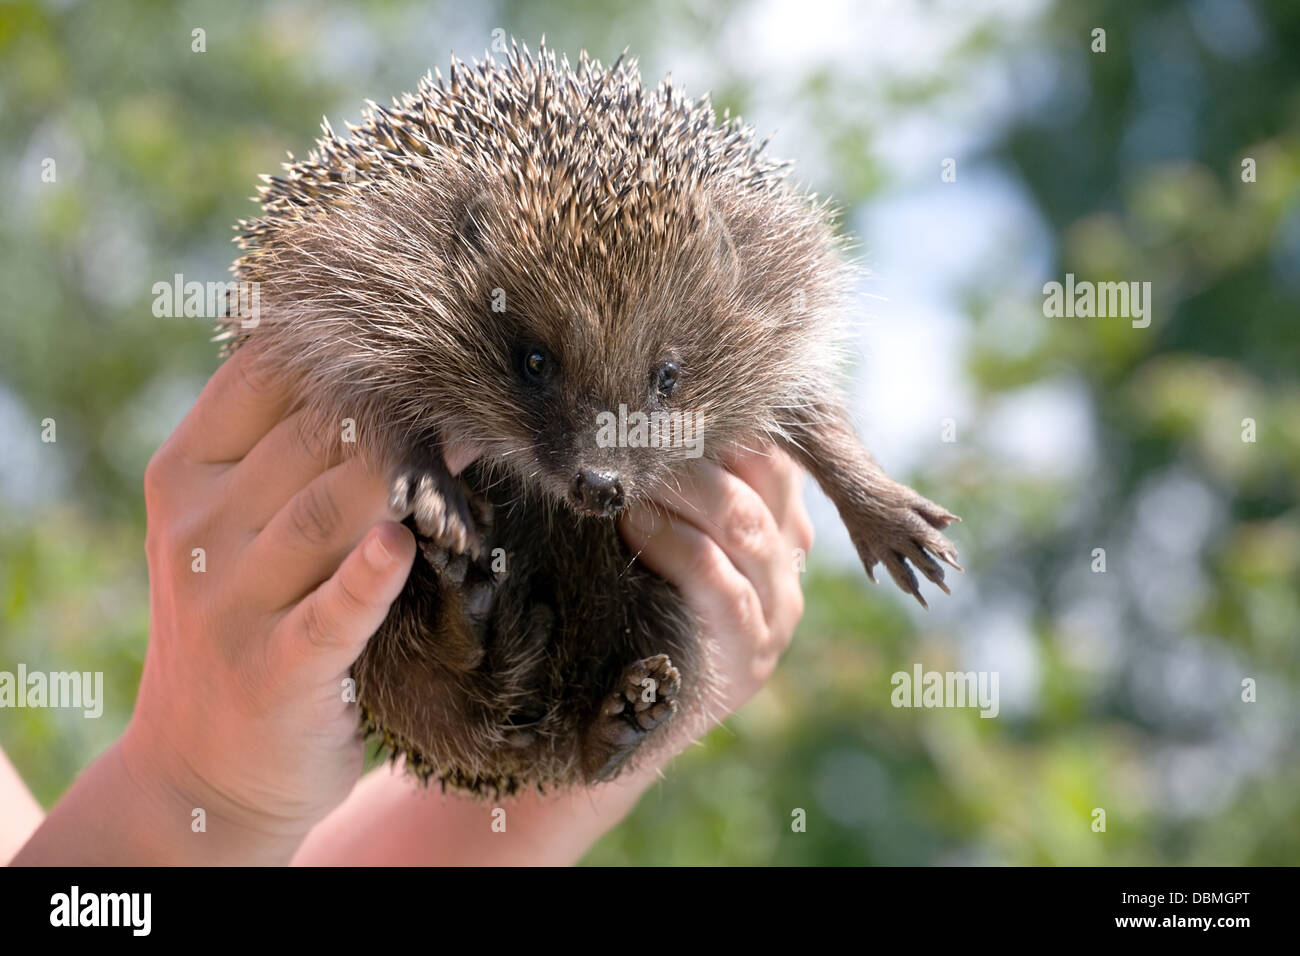 hedgehog in human hands looking at camera on nature outdoor background Stock Photo